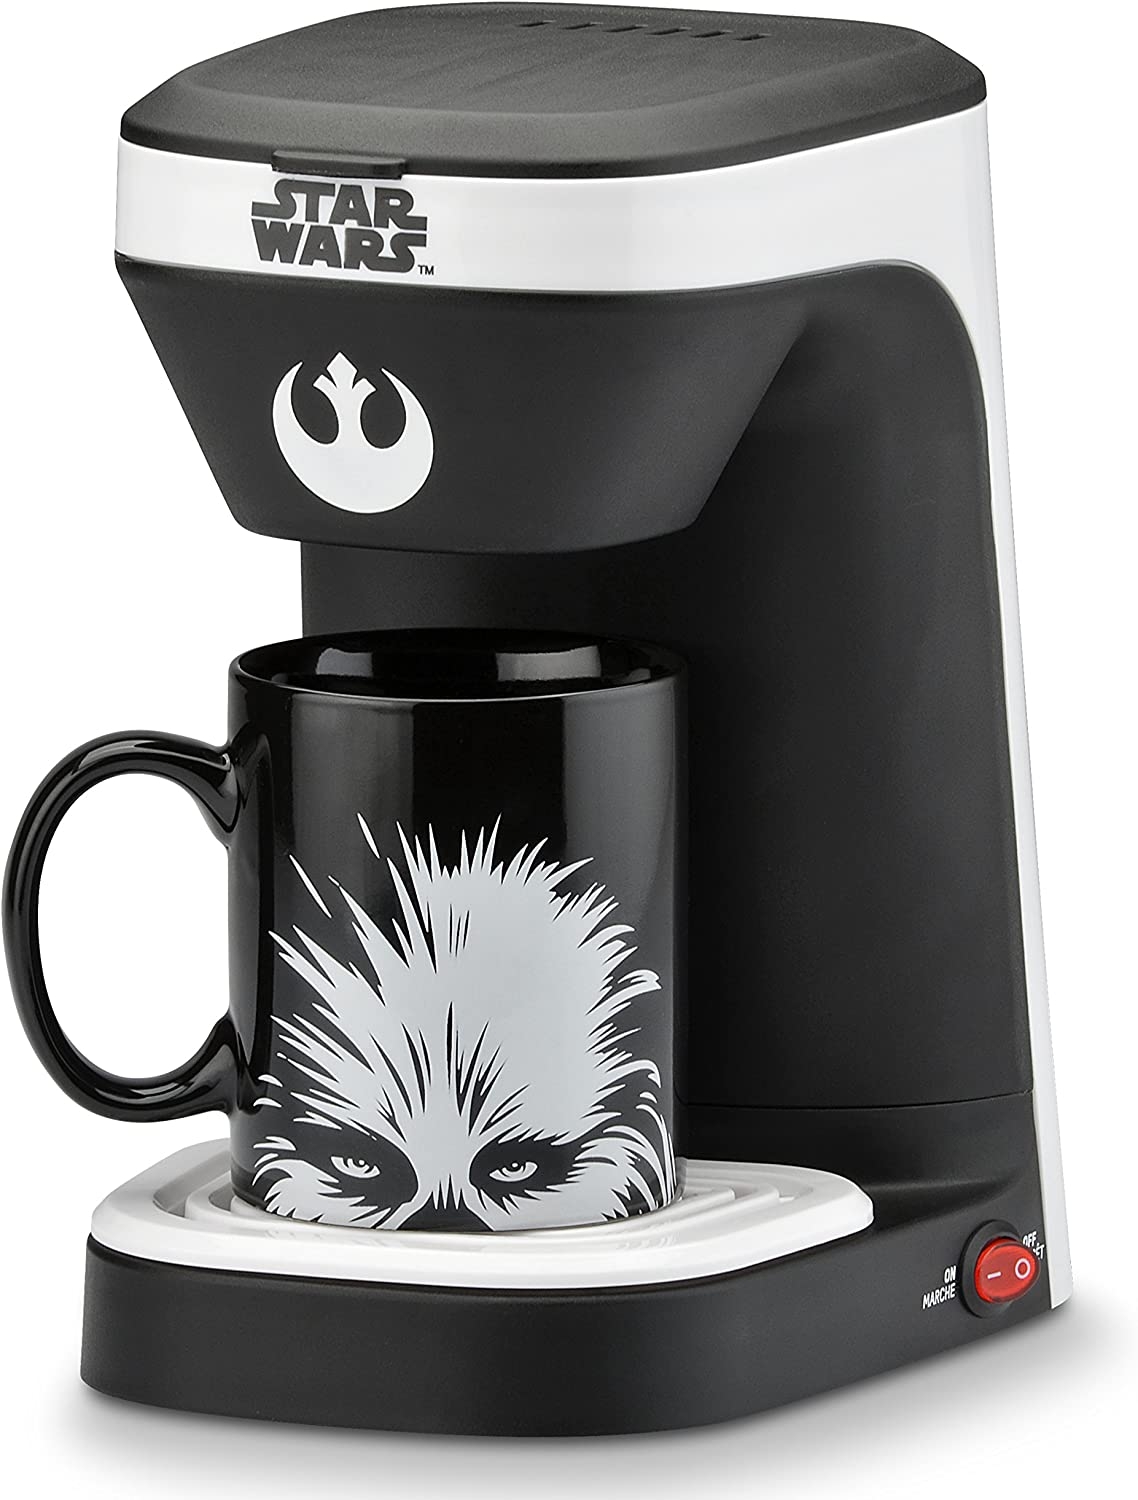 STAR WARS 1-Cup Coffee Maker with Mug,Black,Single Serve Import To Shop ×Product customization General Description Gallery